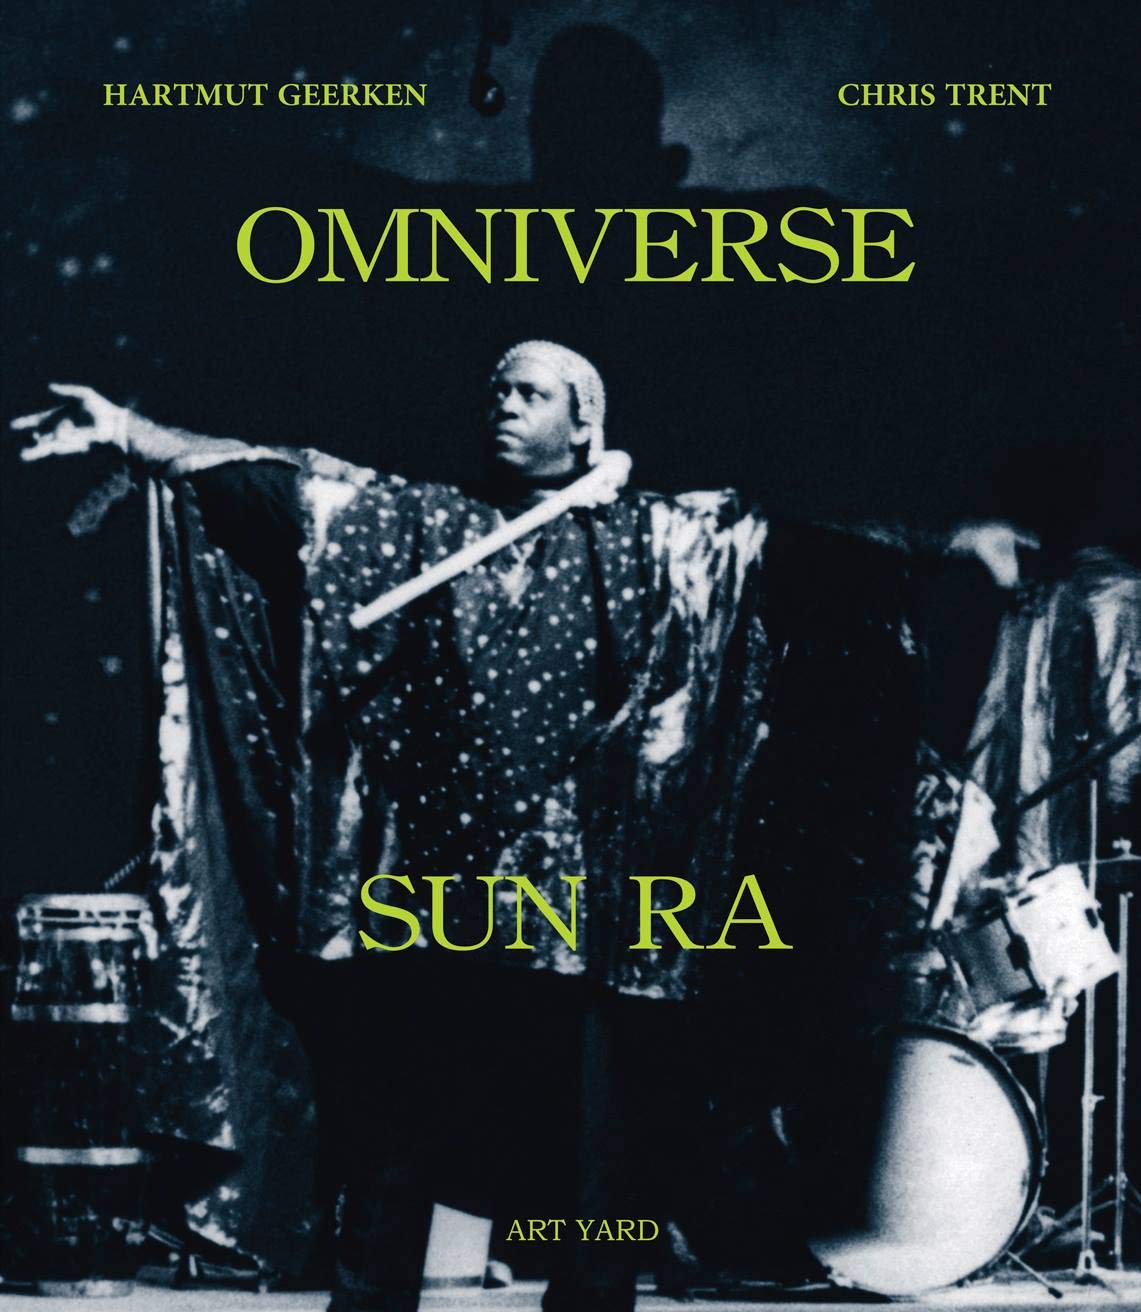 Omniverse – Sun Ra by Hartmut Geerken and Chris Trent Expanded and revised hardback 2nd edition Published by Art Yard